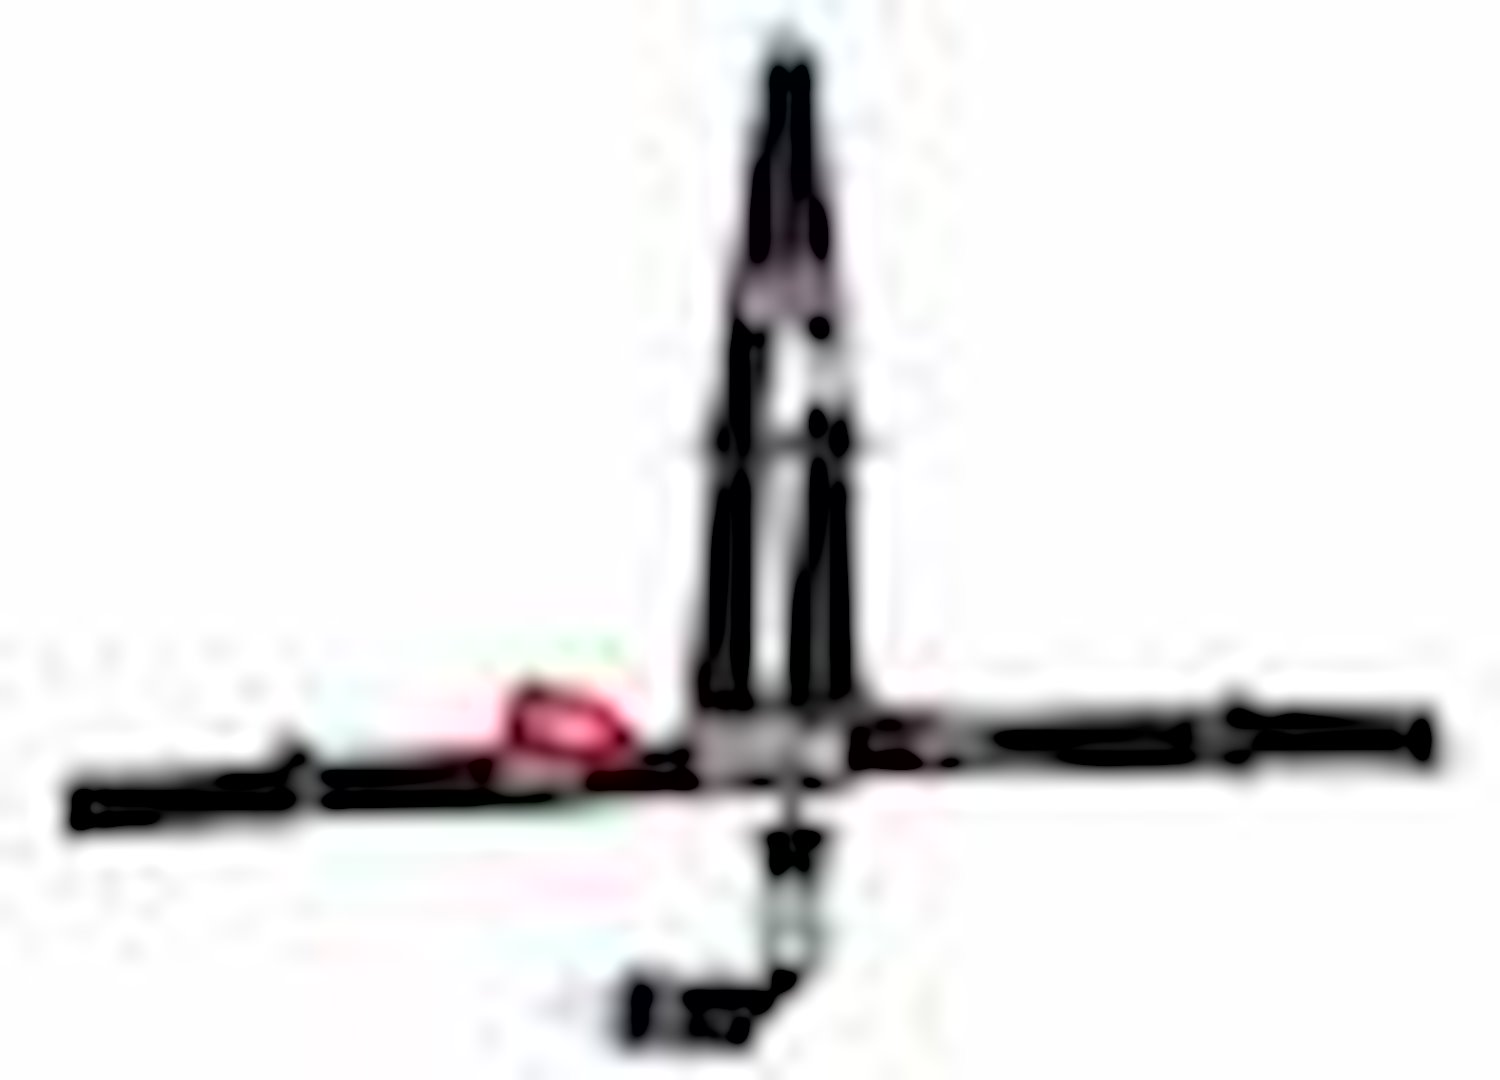 SFI 16.1 L&L HARNESS 2 PULL DOWN Lap Belt 2 Shoulder Harness Individual ROLL BAR Mount 2 DOUBLE Sub ALL WRAP ENDS HOT PINK